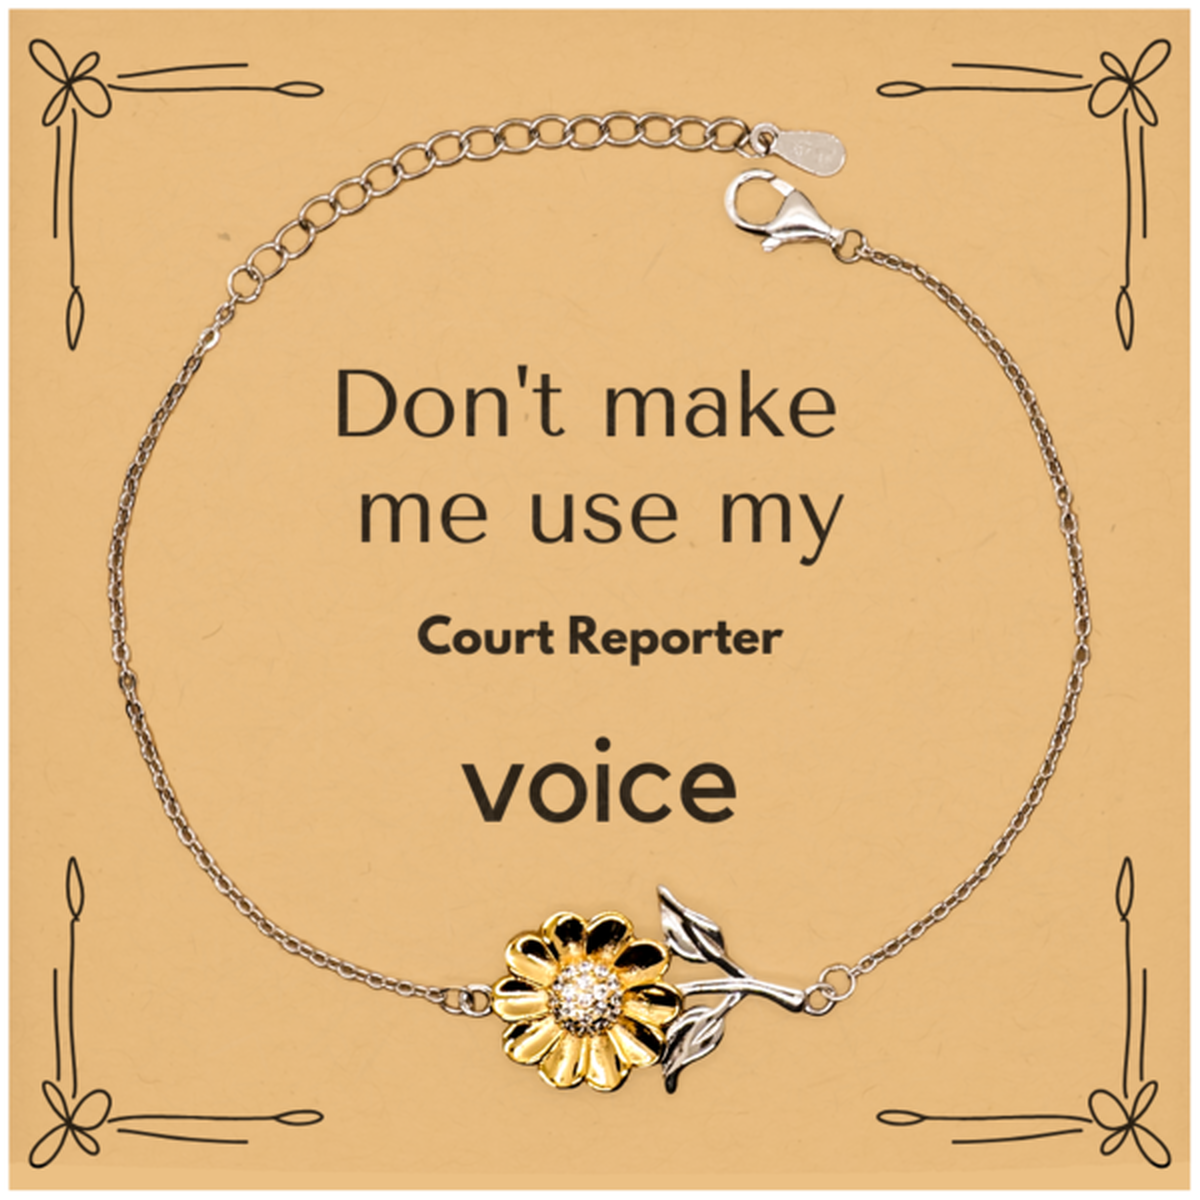 Don't make me use my Court Reporter voice, Sarcasm Court Reporter Card Gifts, Christmas Court Reporter Sunflower Bracelet Birthday Unique Gifts For Court Reporter Coworkers, Men, Women, Colleague, Friends